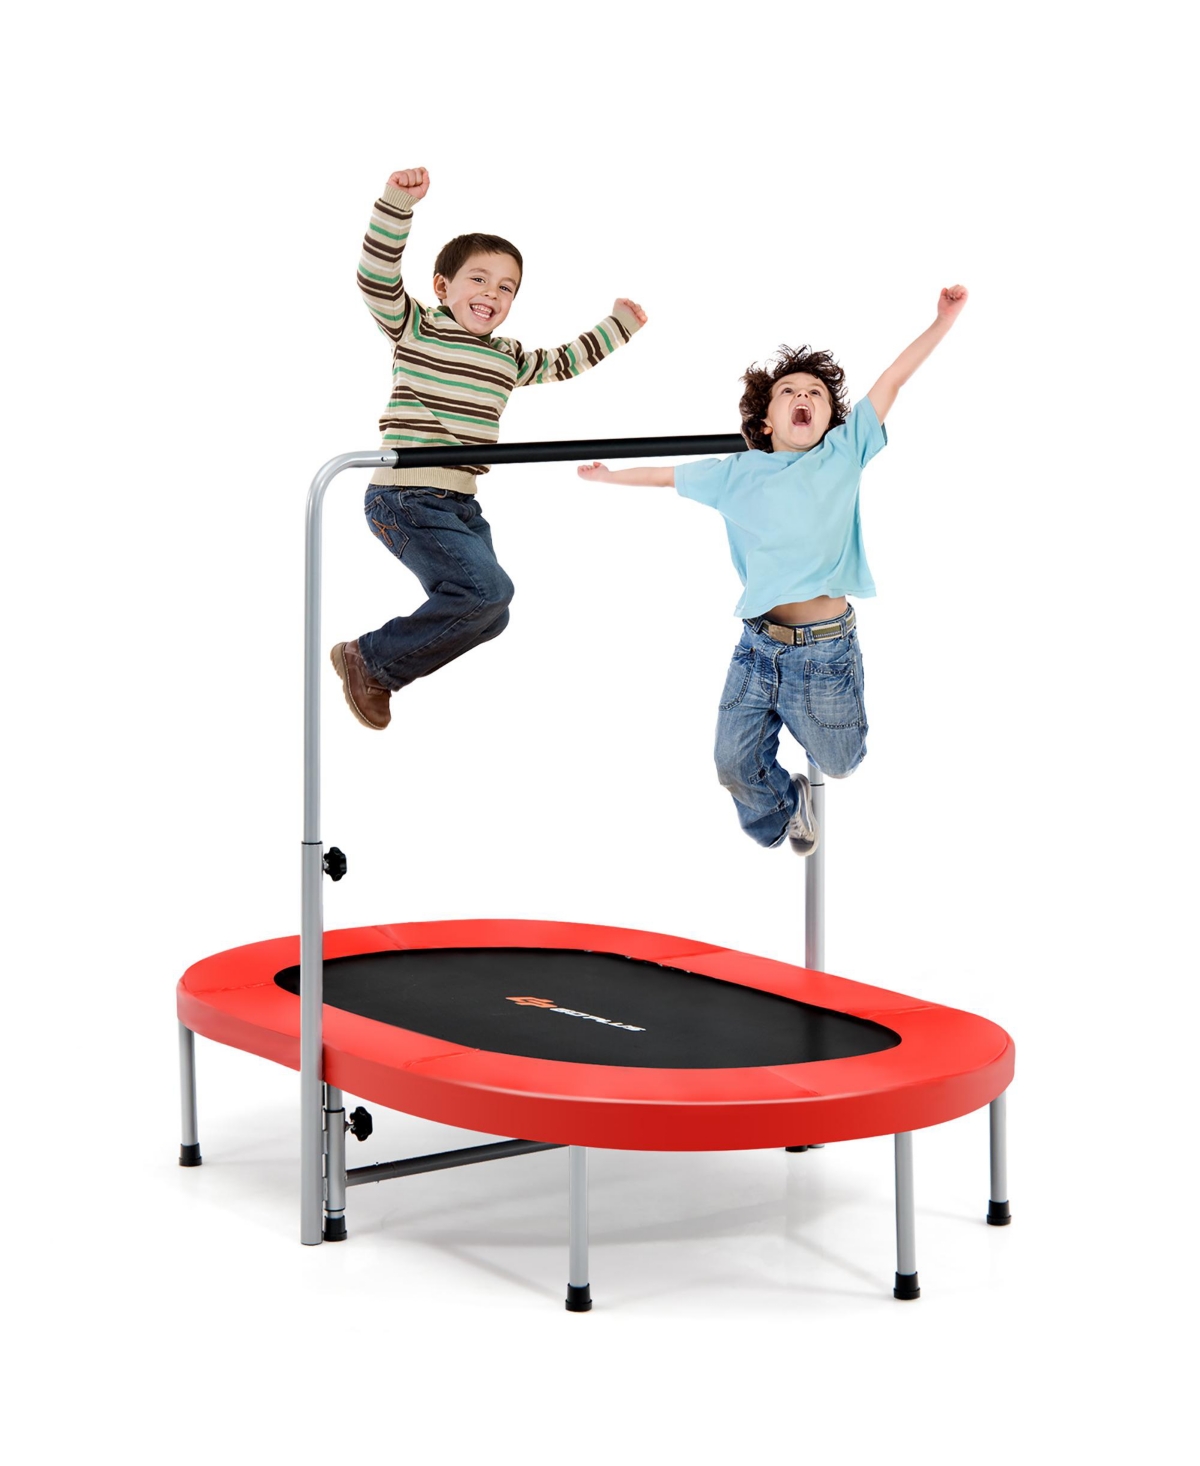 50'' Trampoline for 2 People Foldable Rebouncer - Red